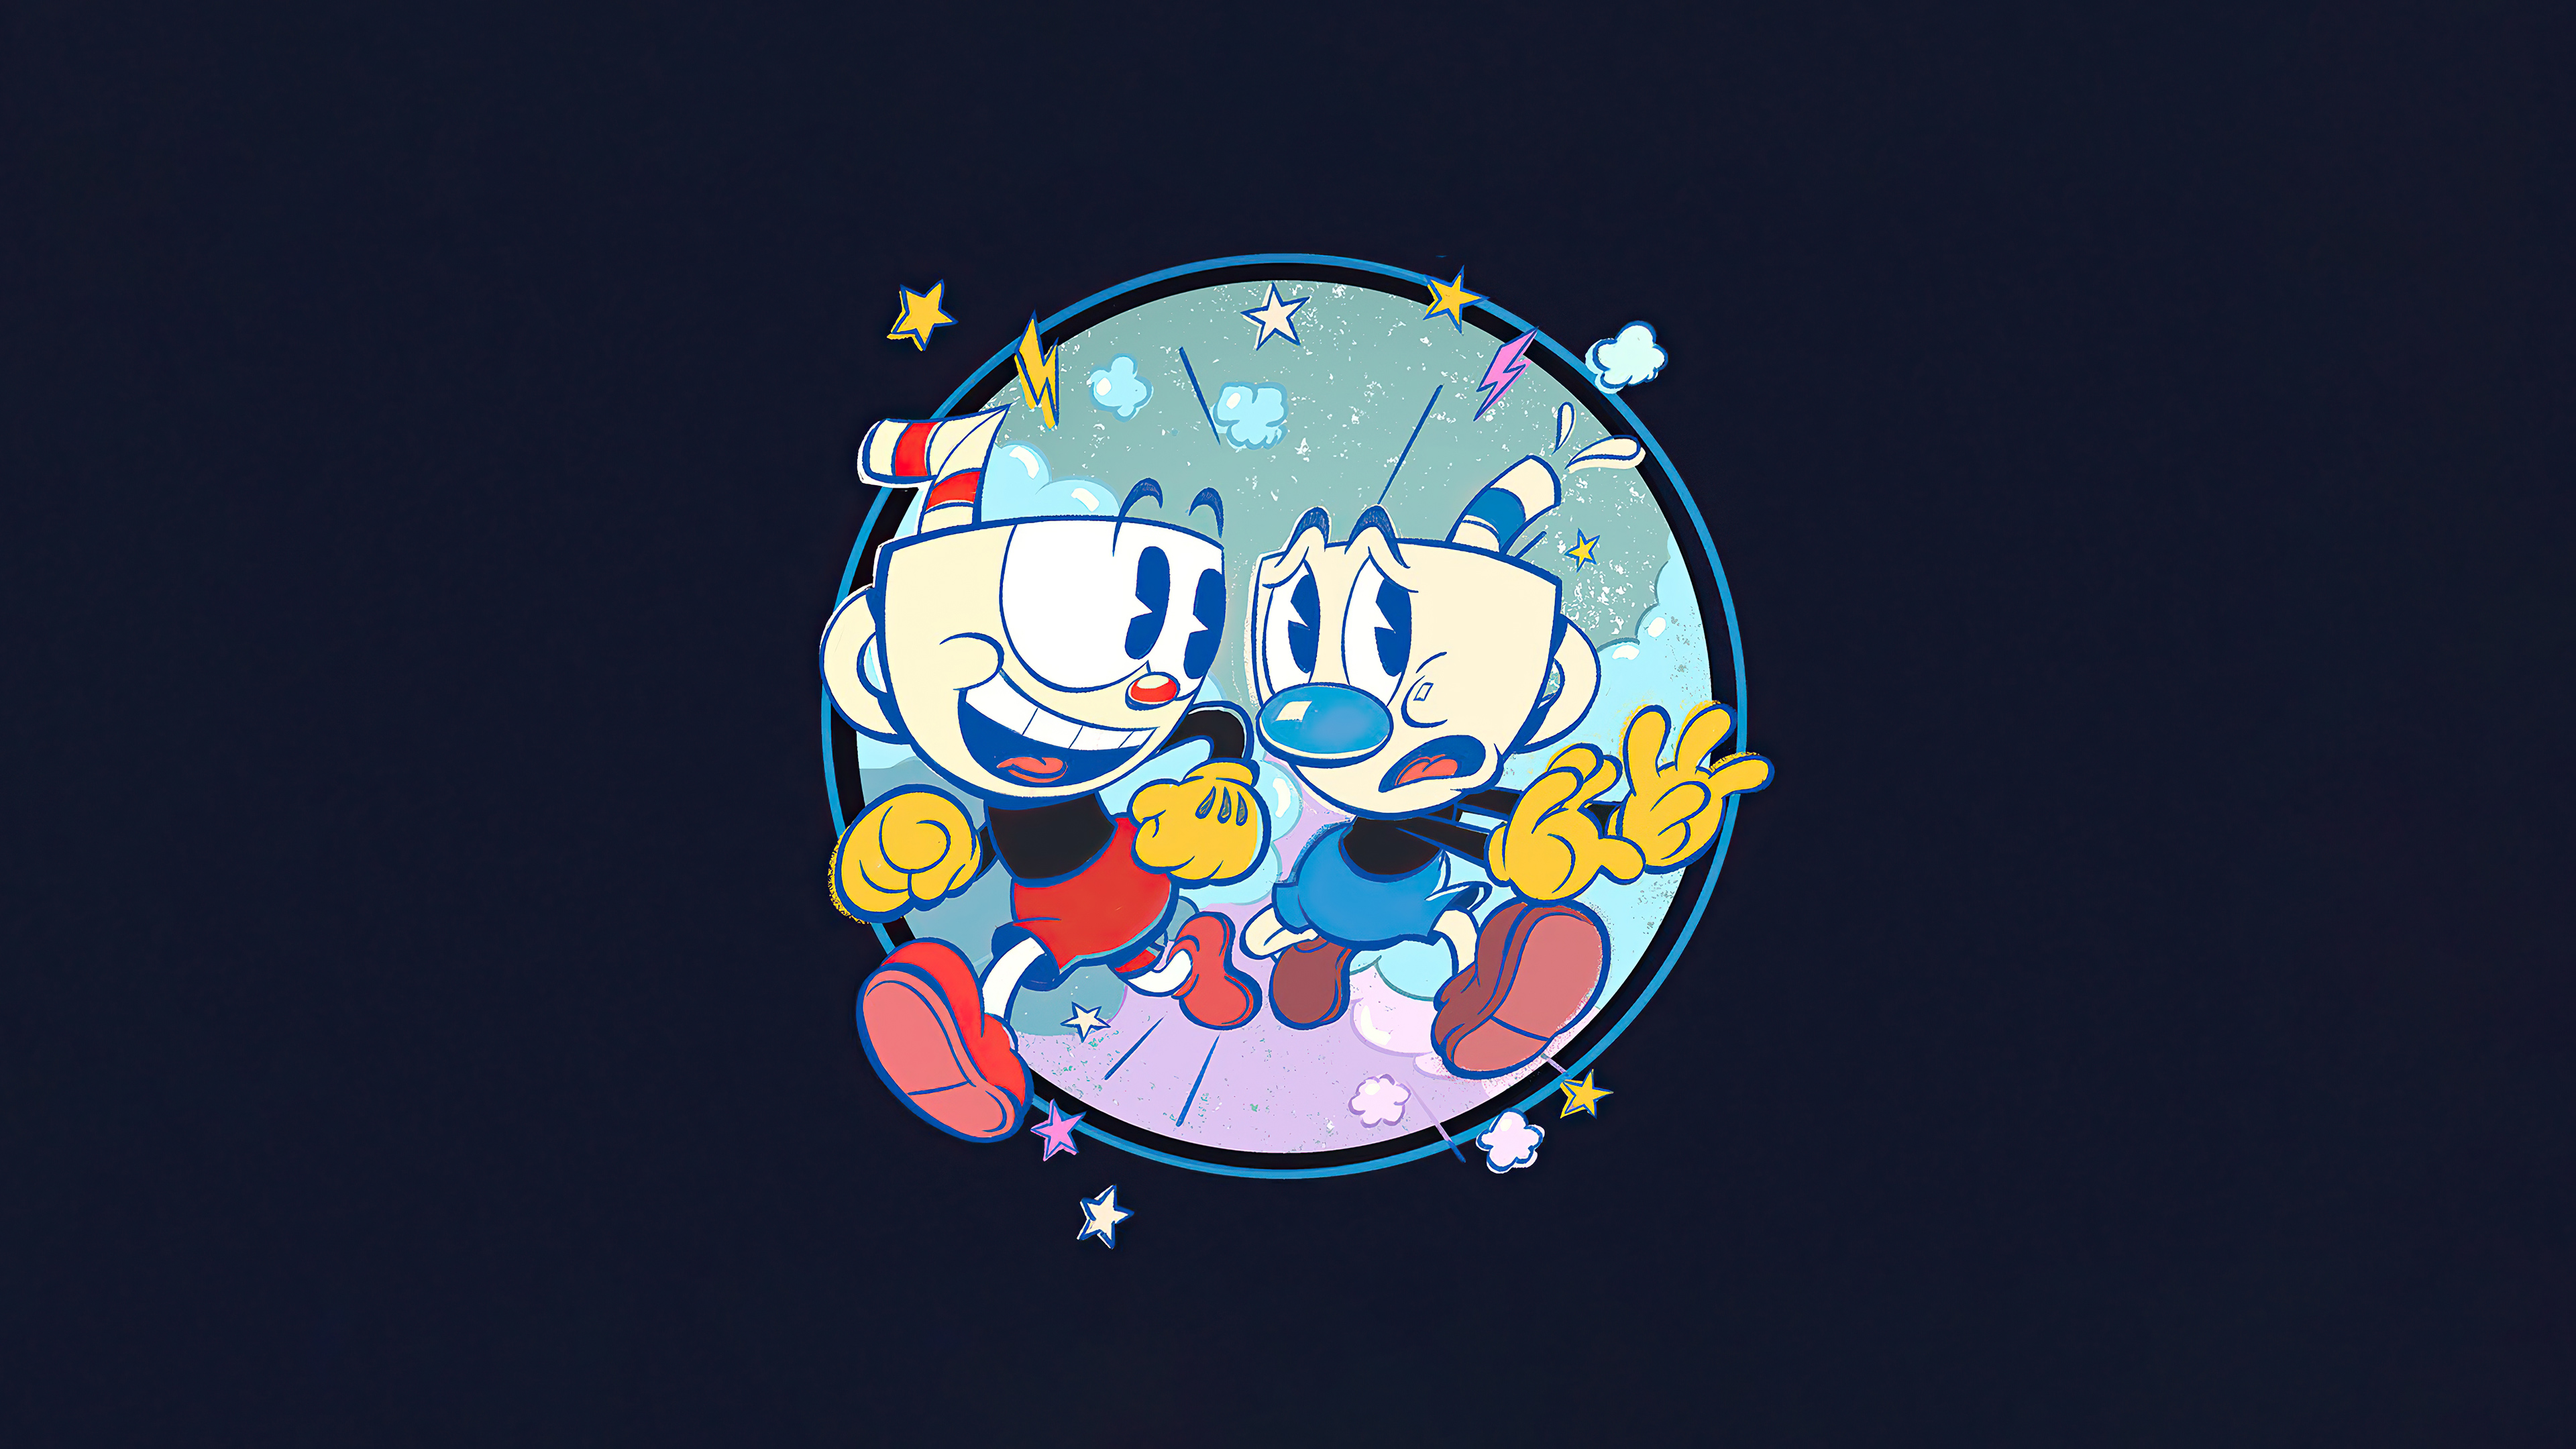 Cuphead Wallpapers